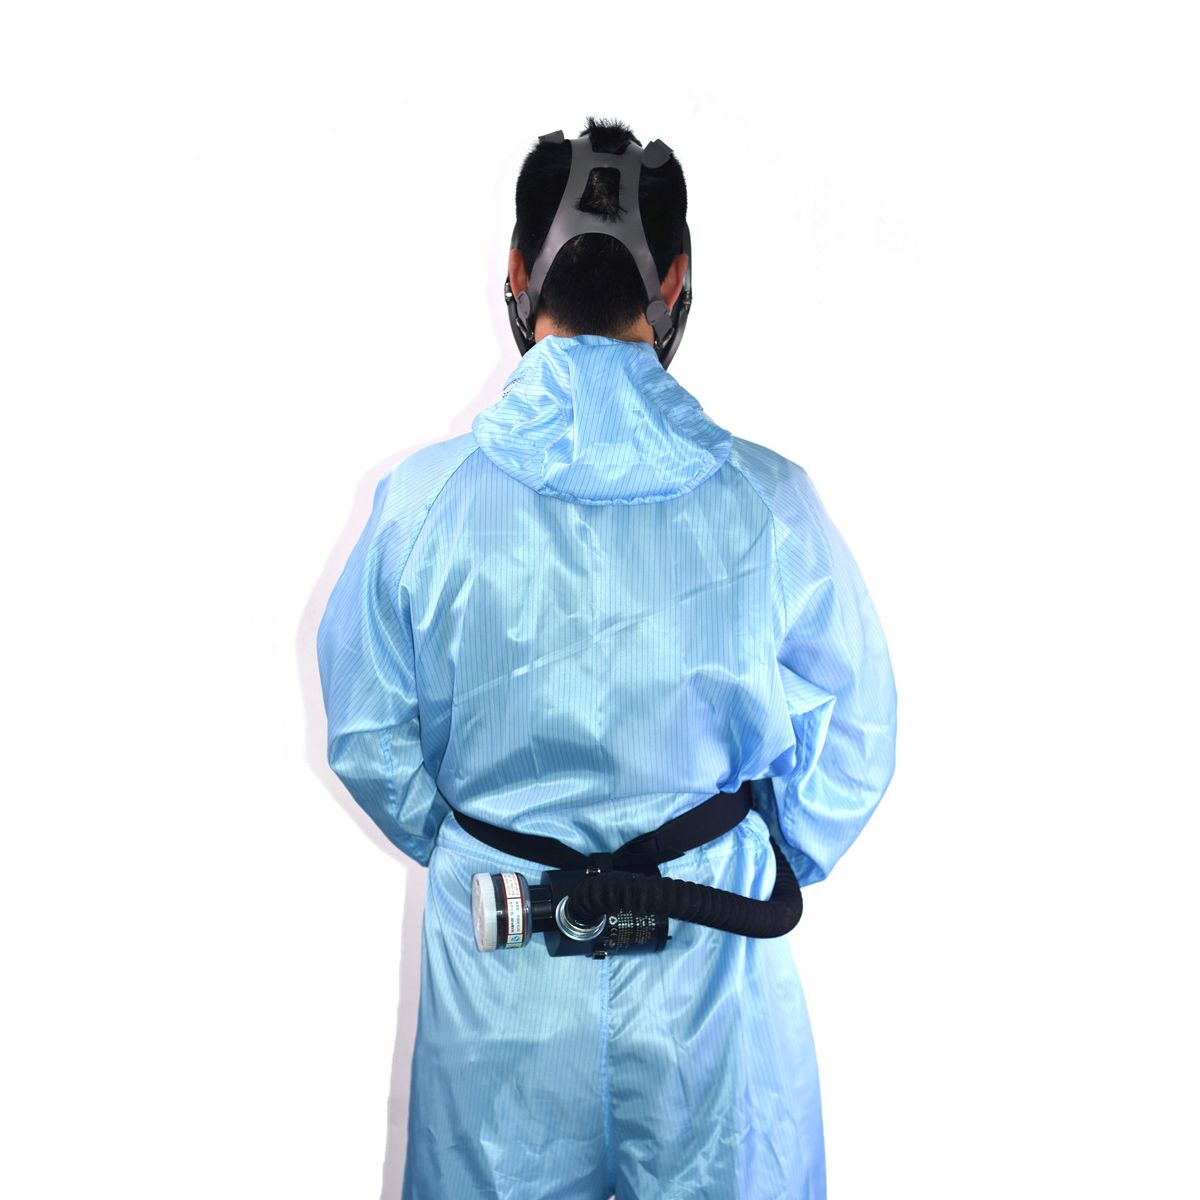 Electric-Constant-Flow-Supplied-Air-Fed-Full-Face-Gas-Mask-Spray-Painting-Tool-Respirator-System-1326170